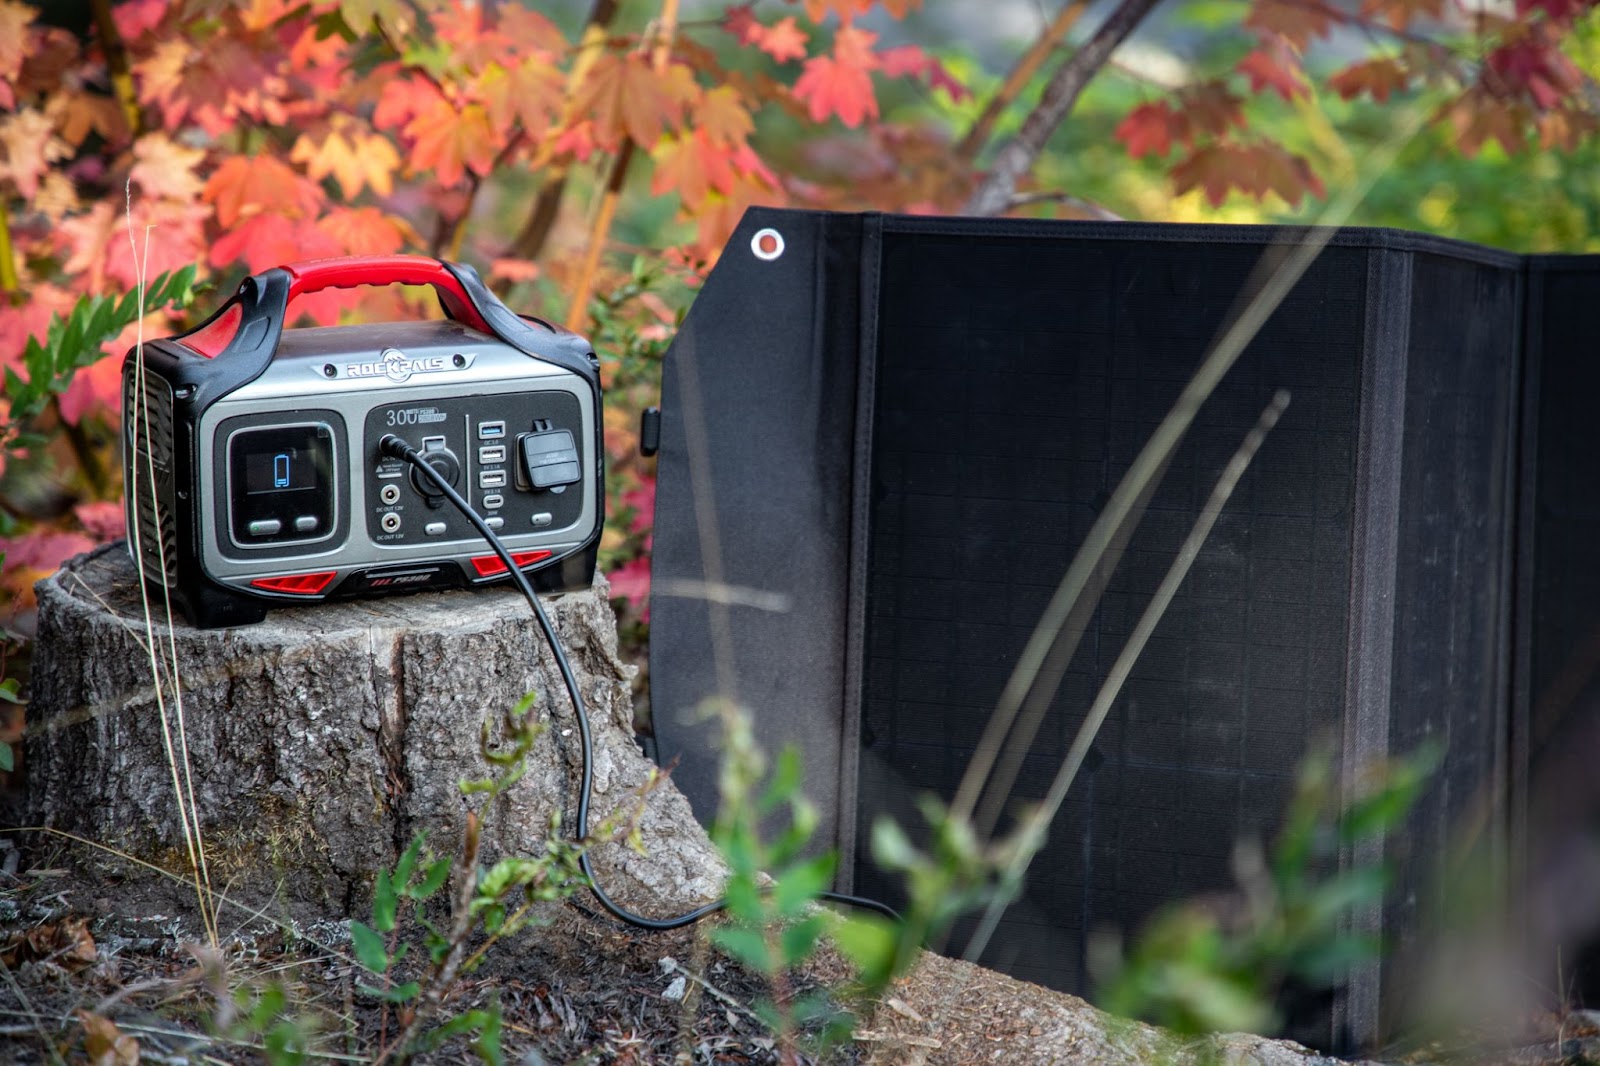 Power bank and radio outdoors